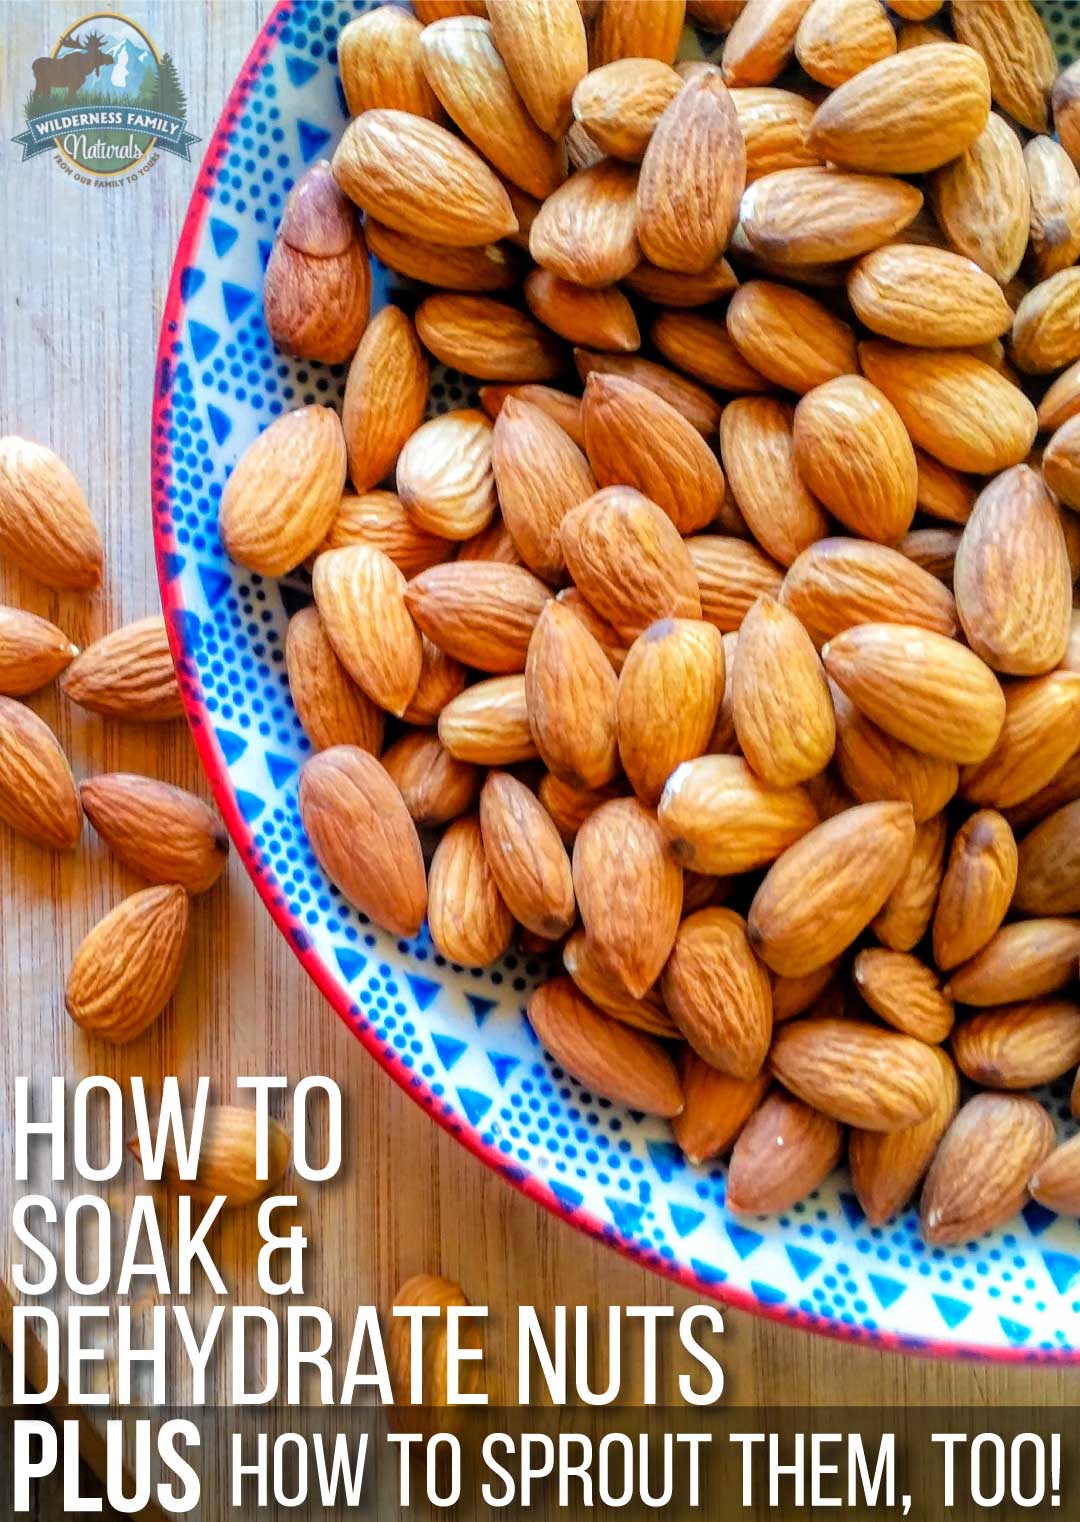 How To Soak & Dehydrate Nuts (plus how to sprout nuts, too!)